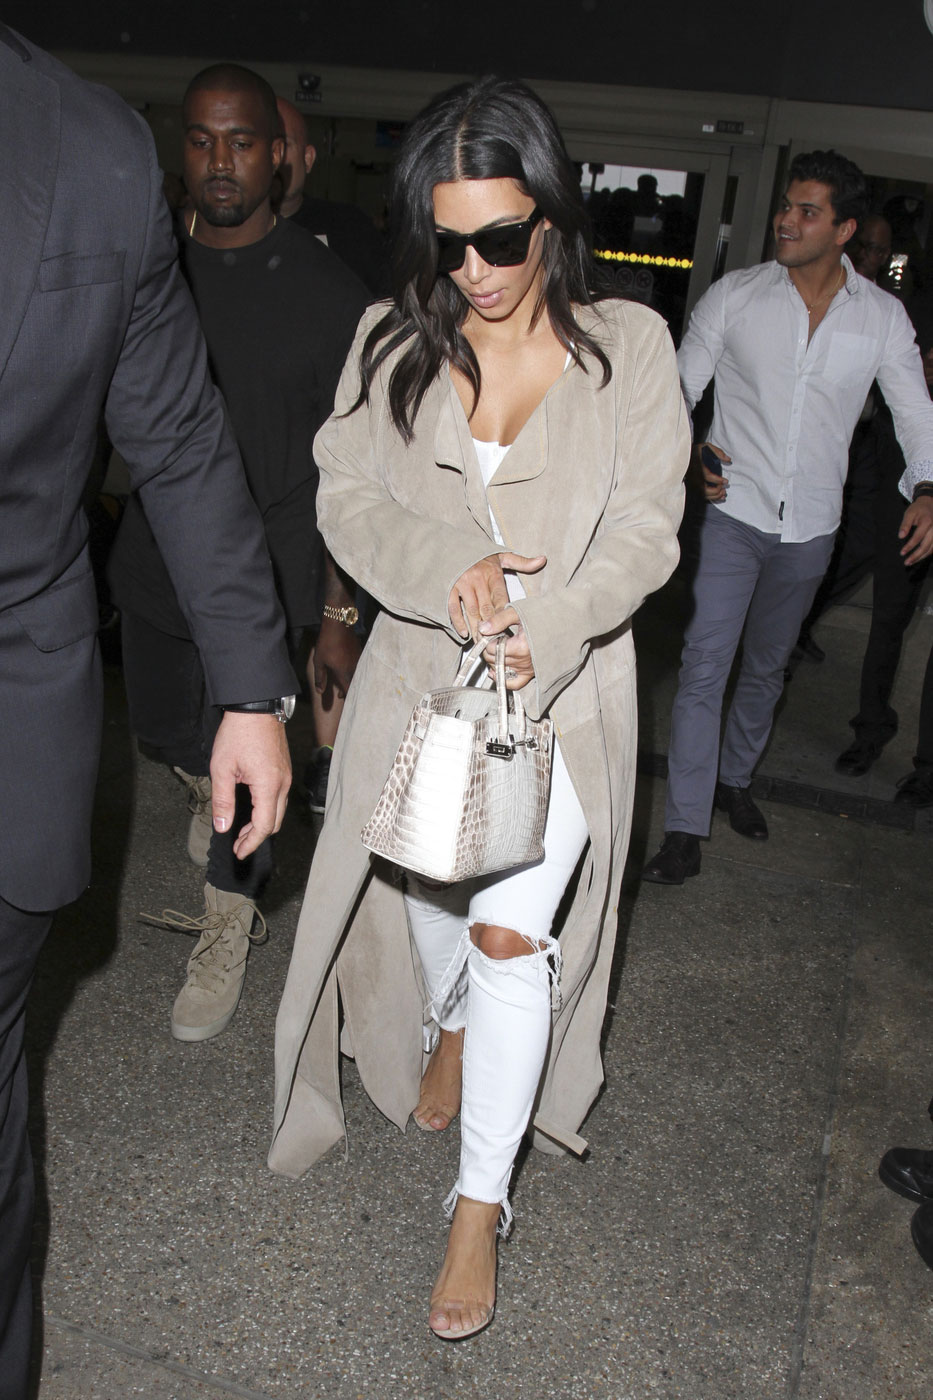 Style tips you can steal from Kim Kardashian